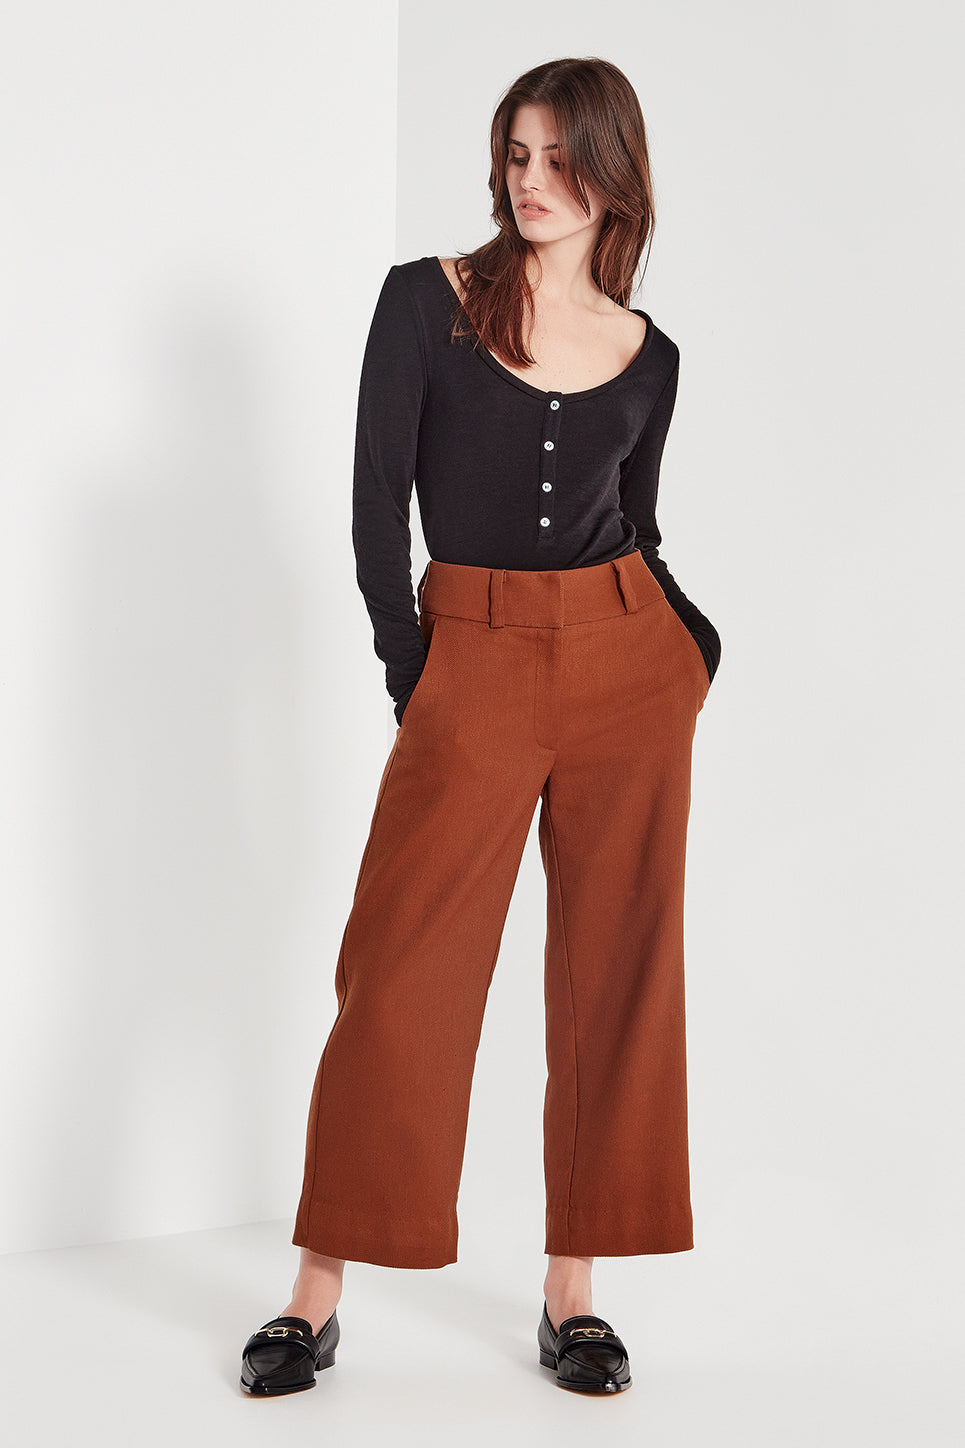 The Willow Trouser in Ginger